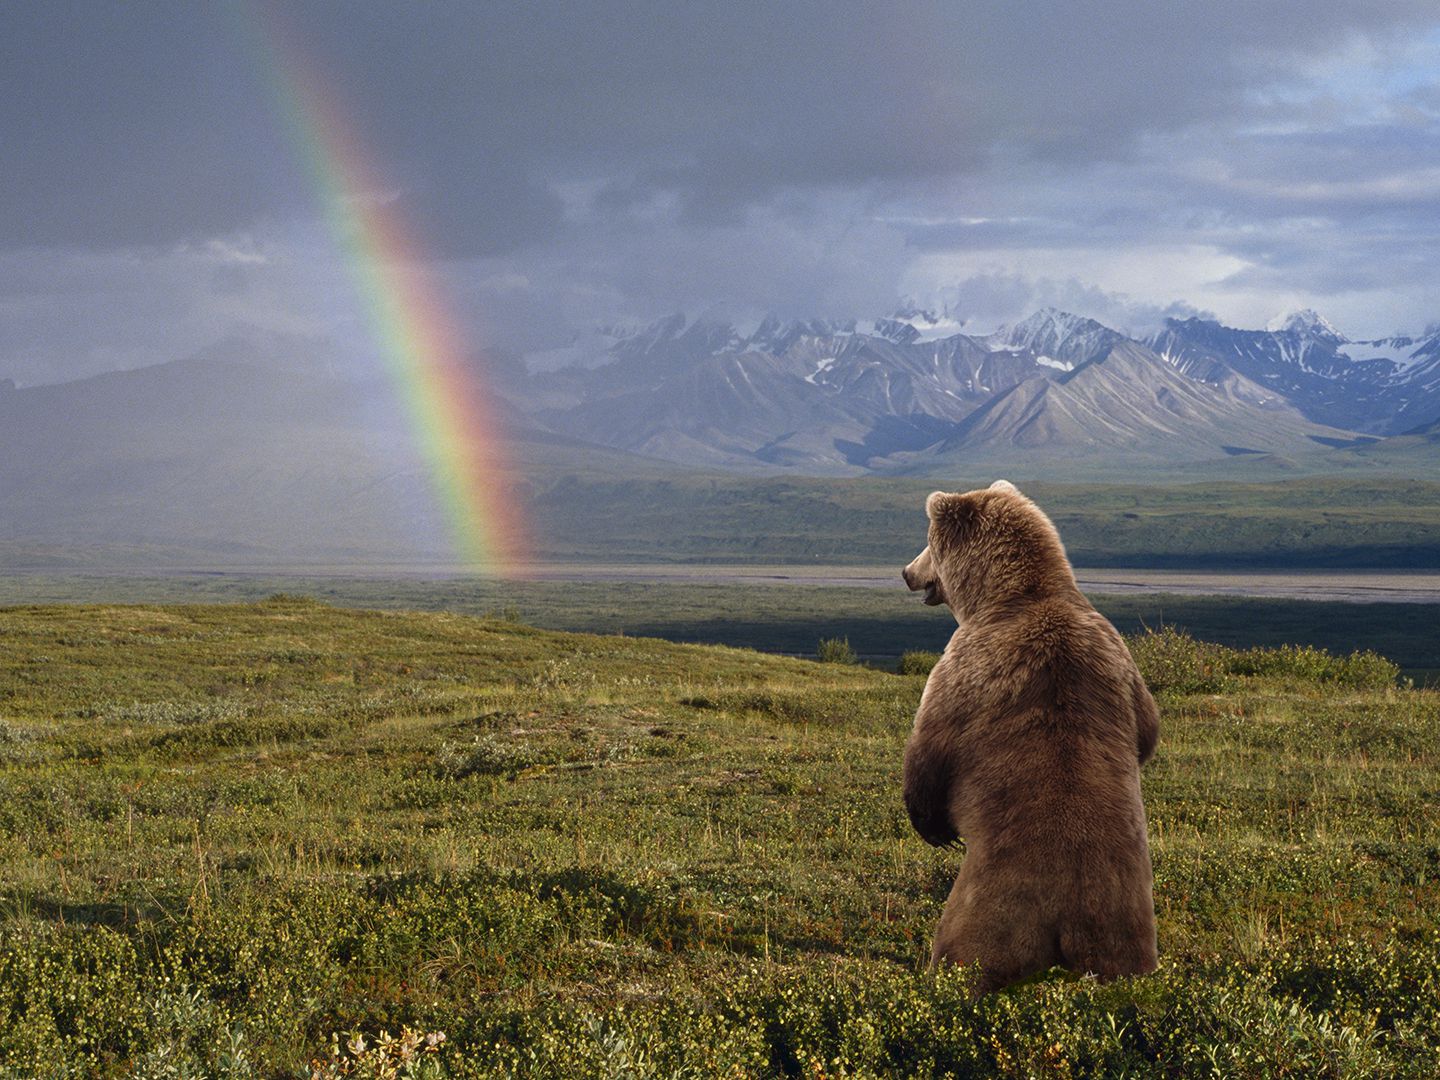 CDCROP: Grizzly bear stands looking at rainbow, Ursus arctos